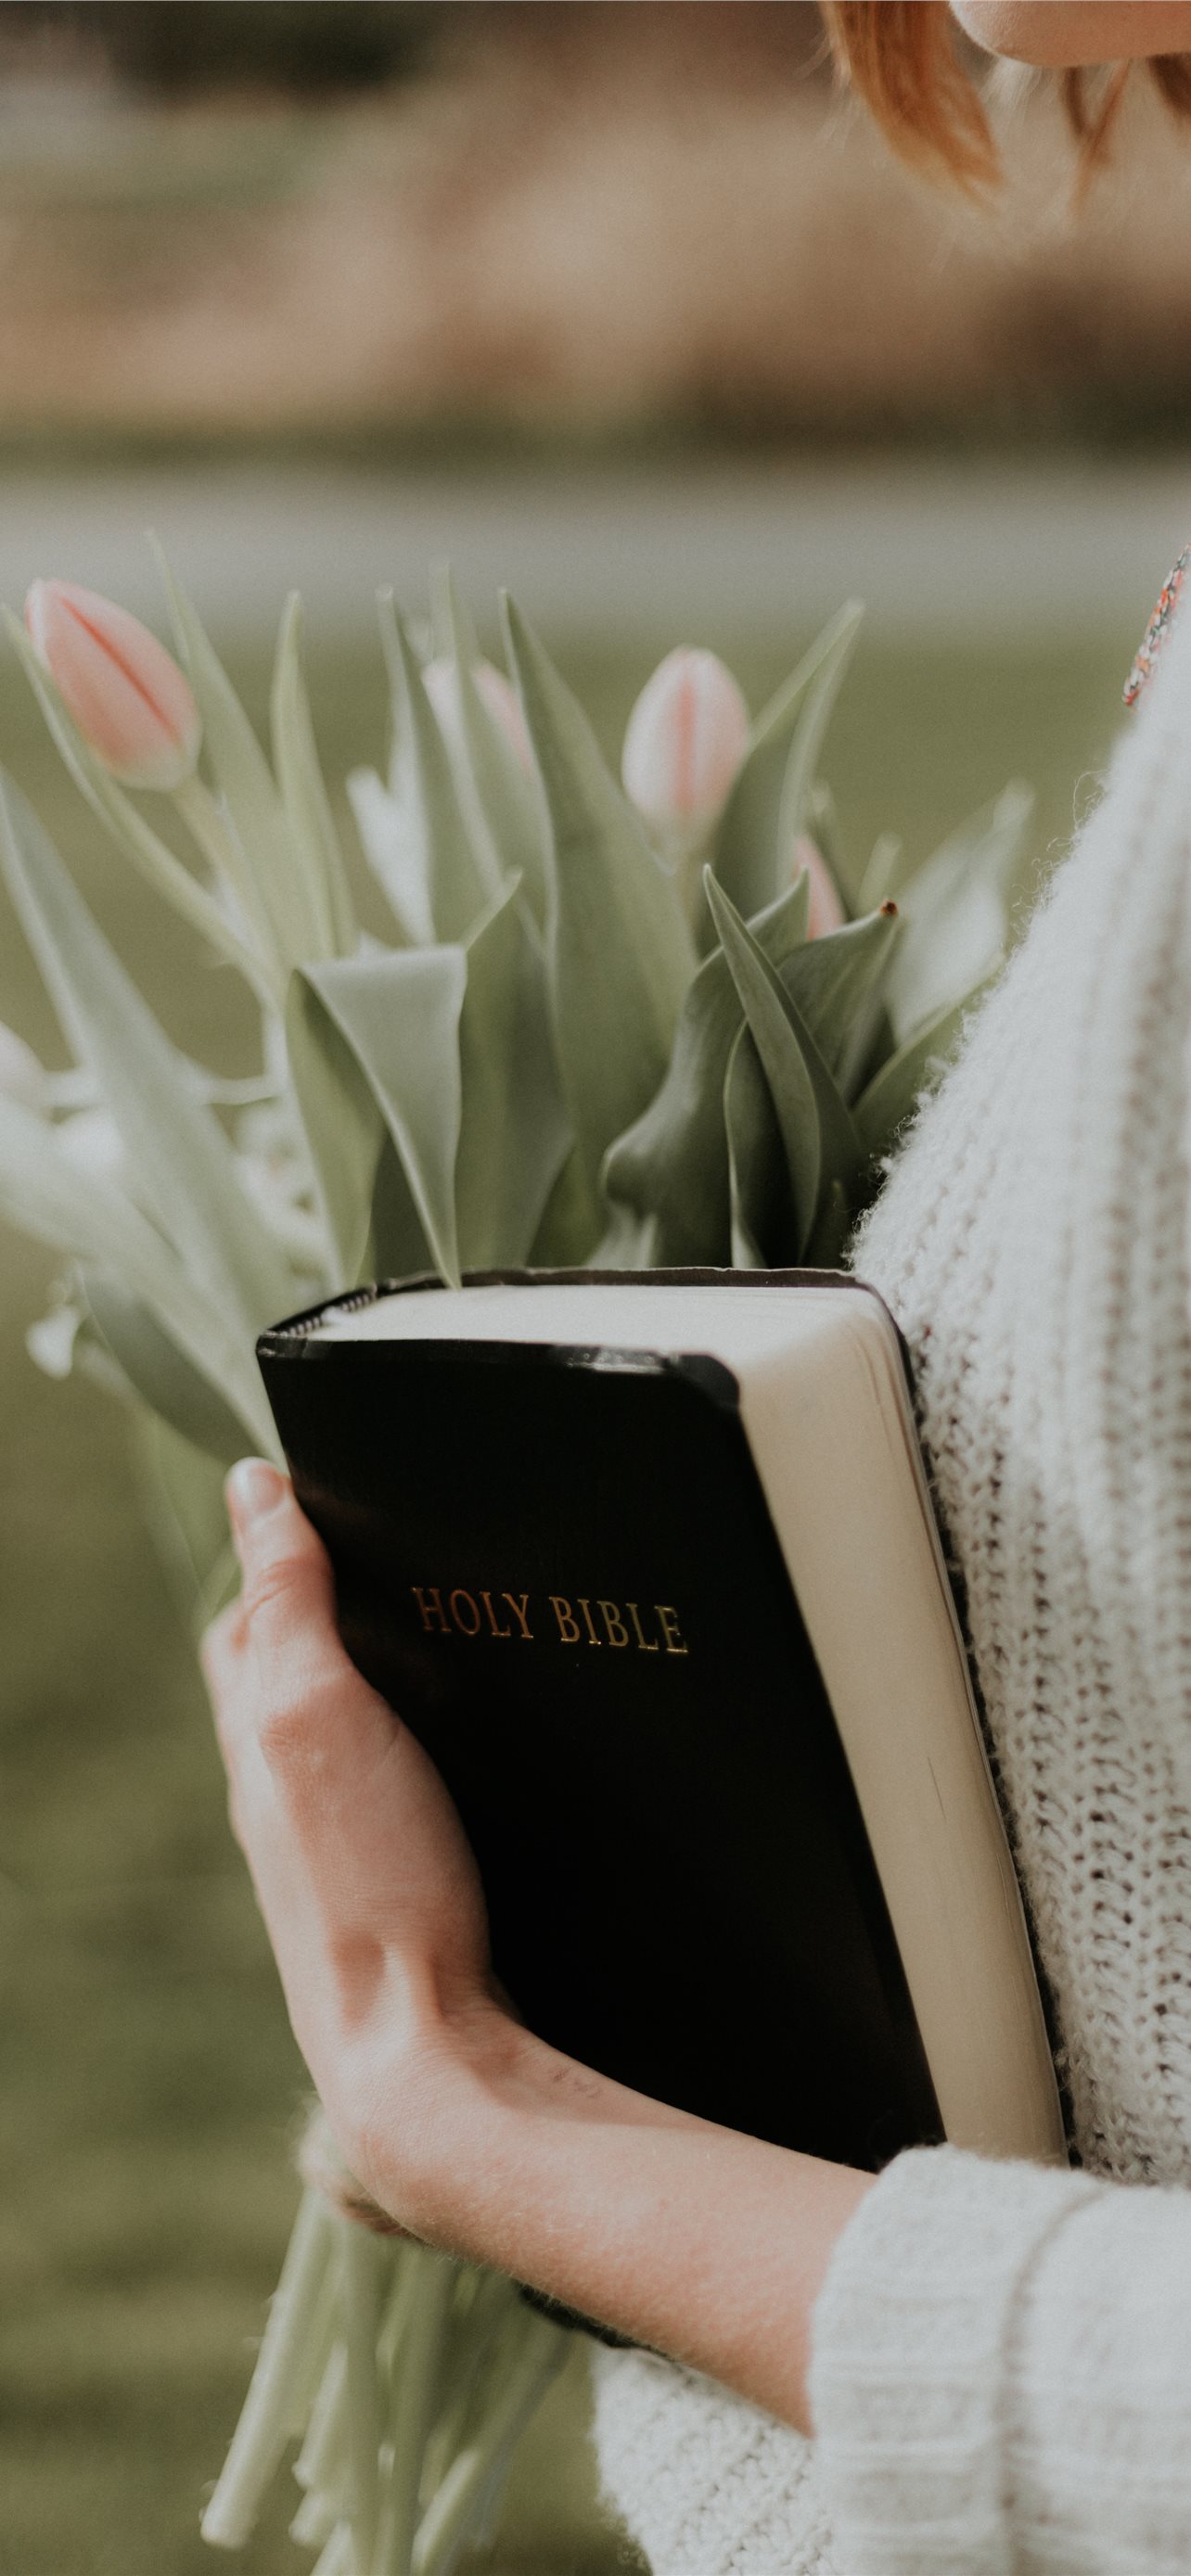 woman holding Holy Bible iPhone Wallpaper Free Download